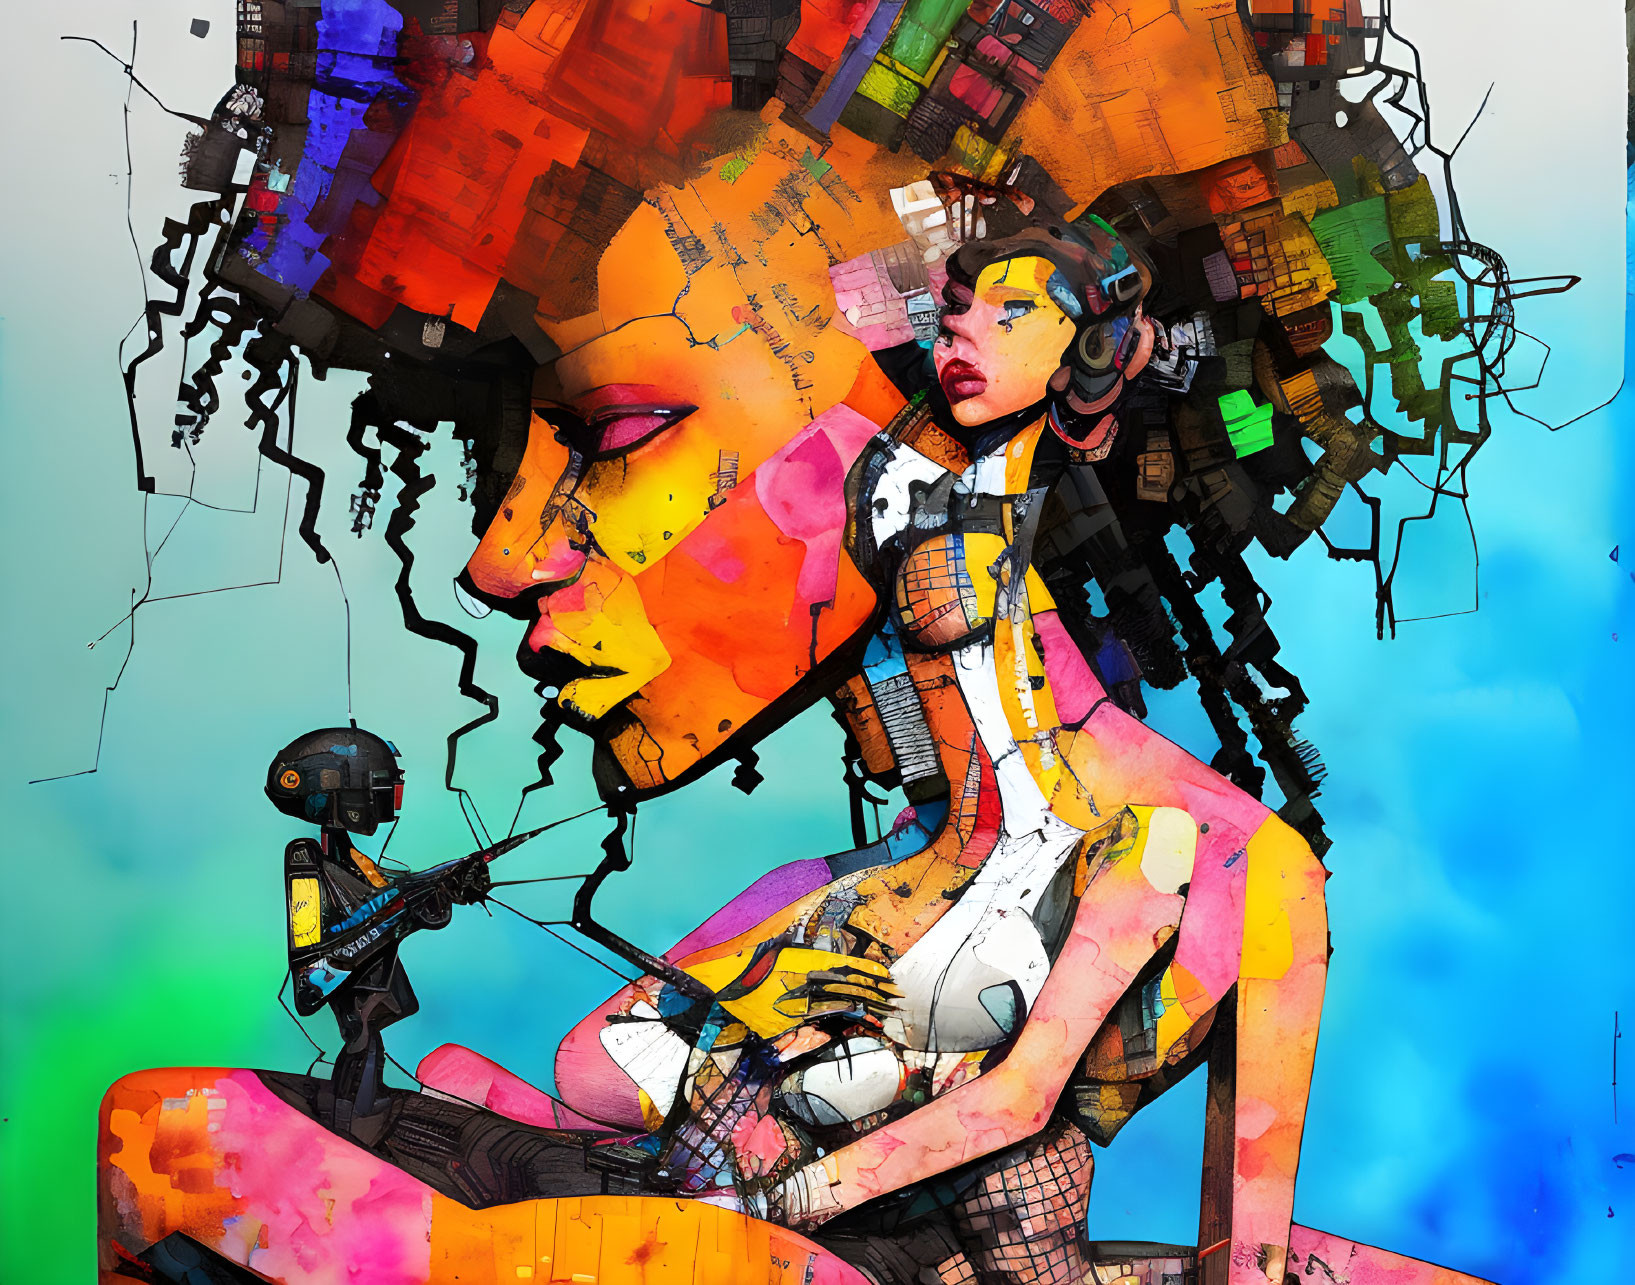 Vivid Abstract Digital Art: Stylized Female Figures & Colorful Paint Splashes